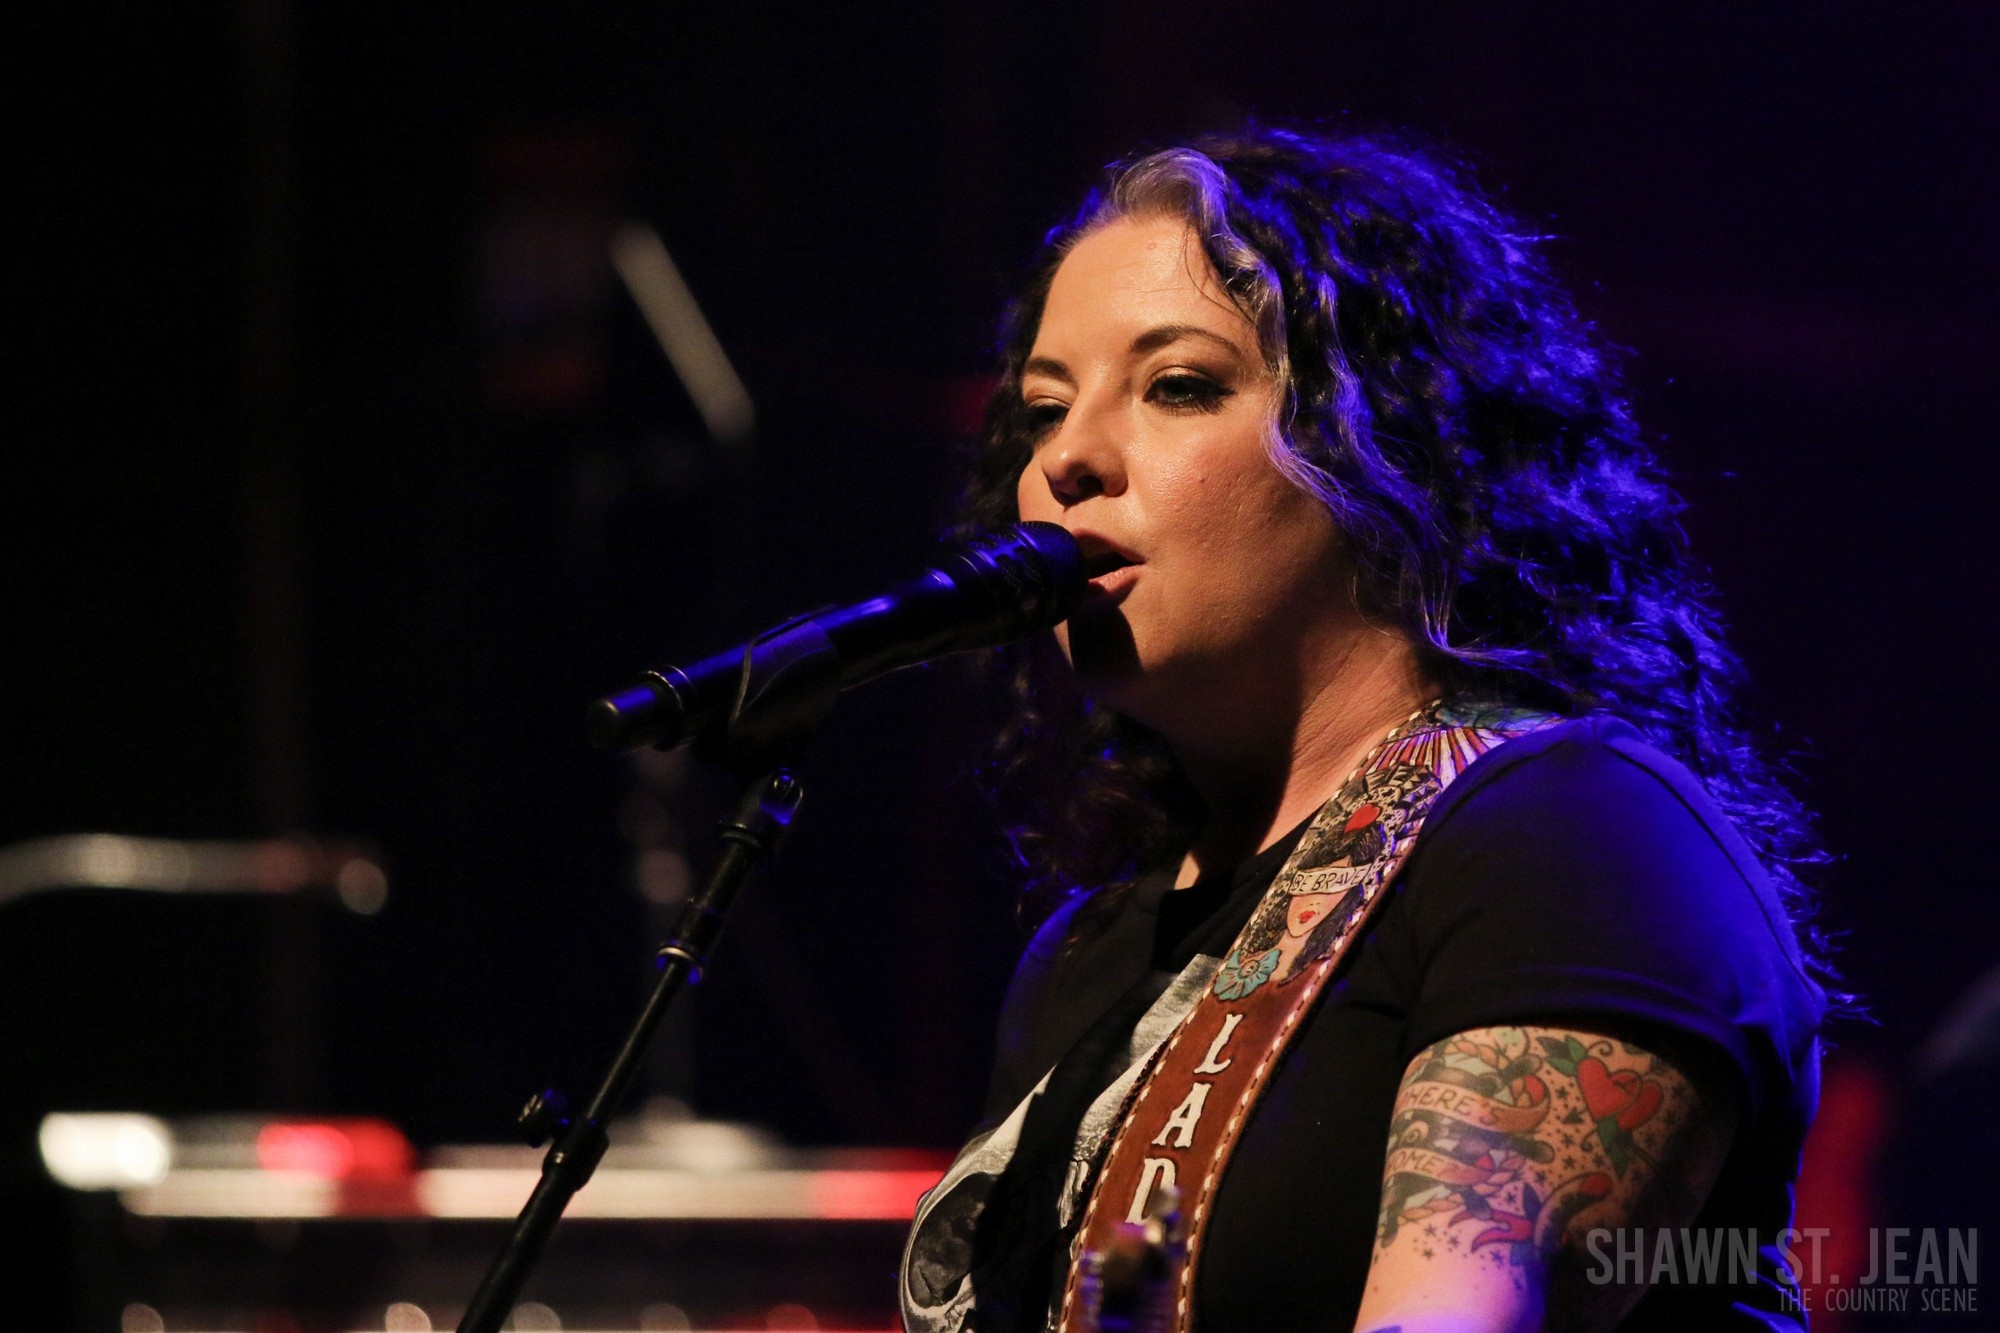 Ashley McBryde, The Country Scene archives, Latest news and updates, 2000x1340 HD Desktop